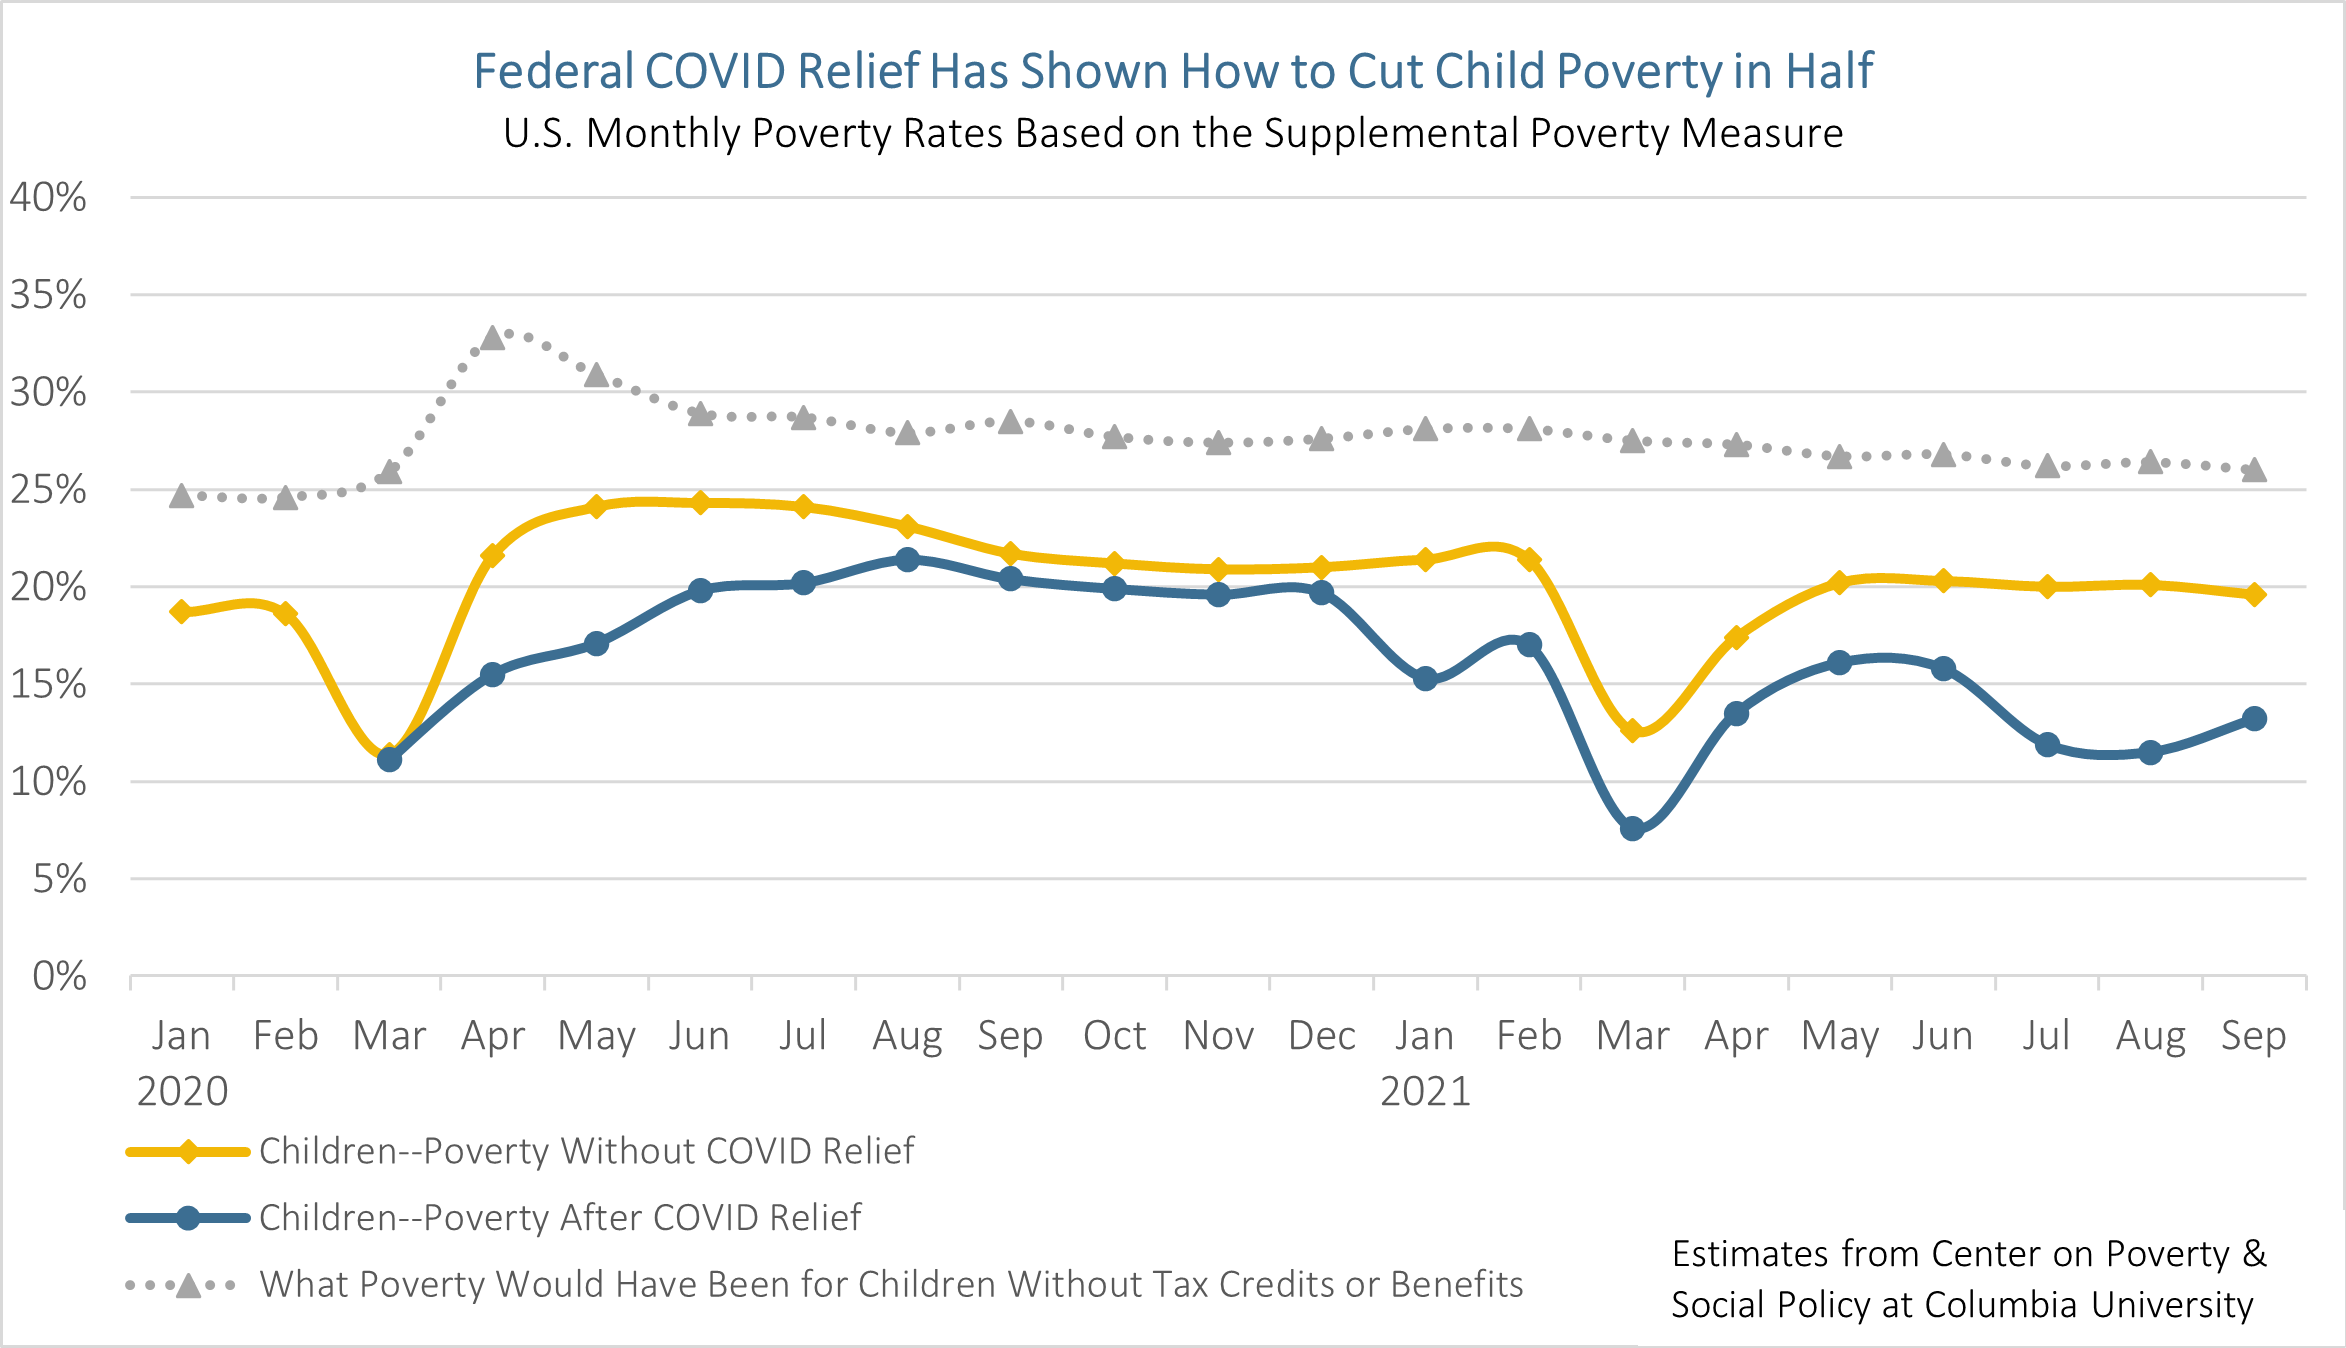 Line chart: Federal COVID Relief Has Shown How to Cut Child Poverty in Half - US Monthly Poverty Rates Based on the Supplemental Poverty Measure